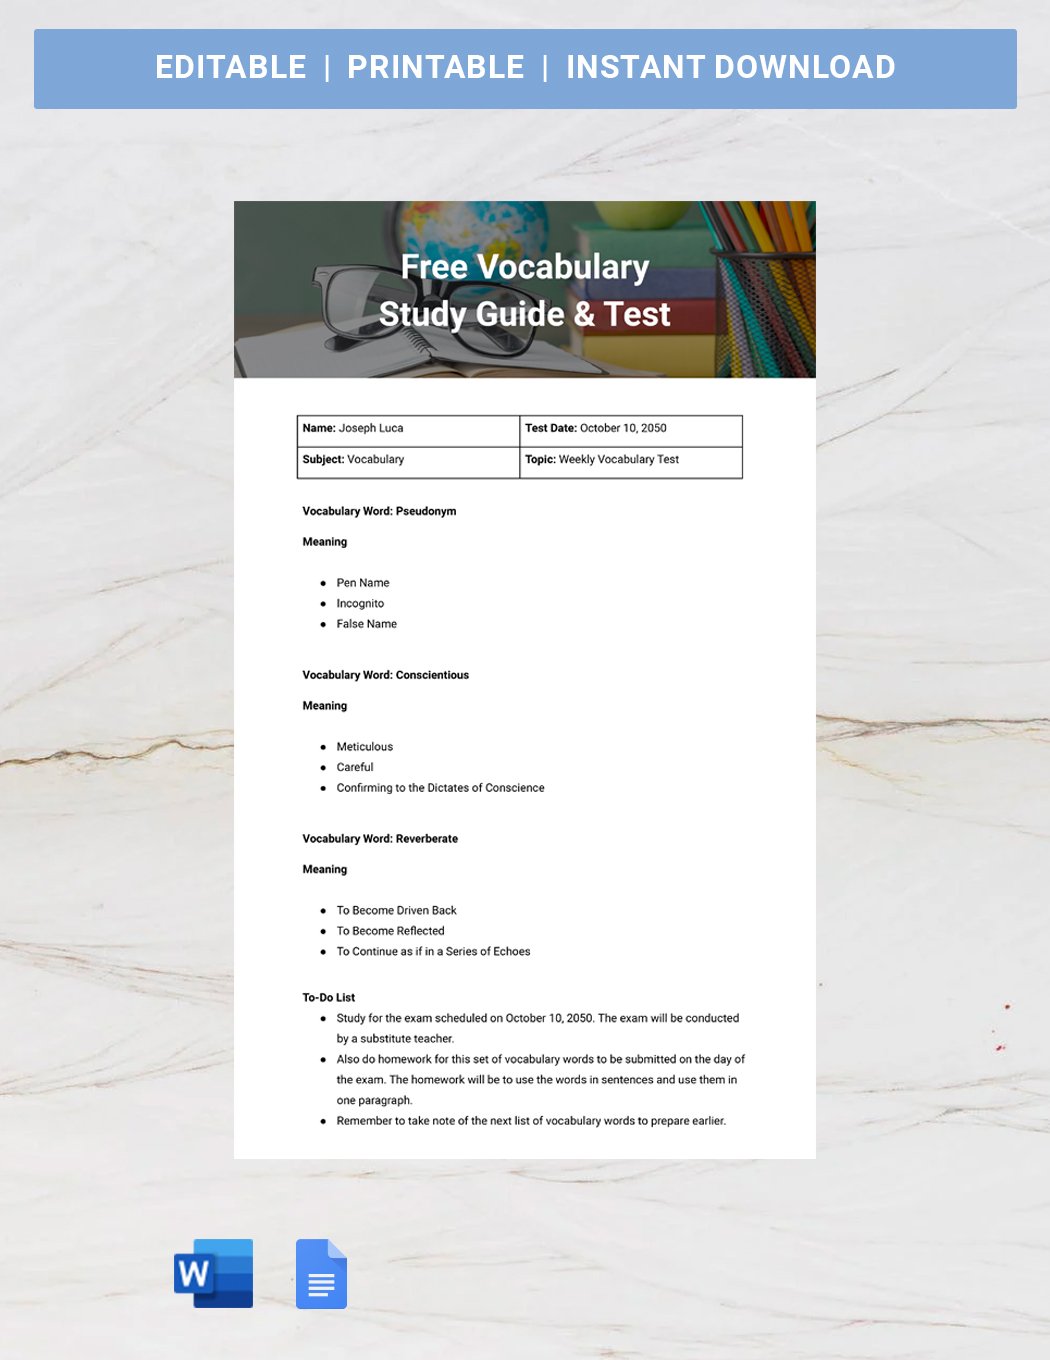 Vocabulary Study Guide & Test Template